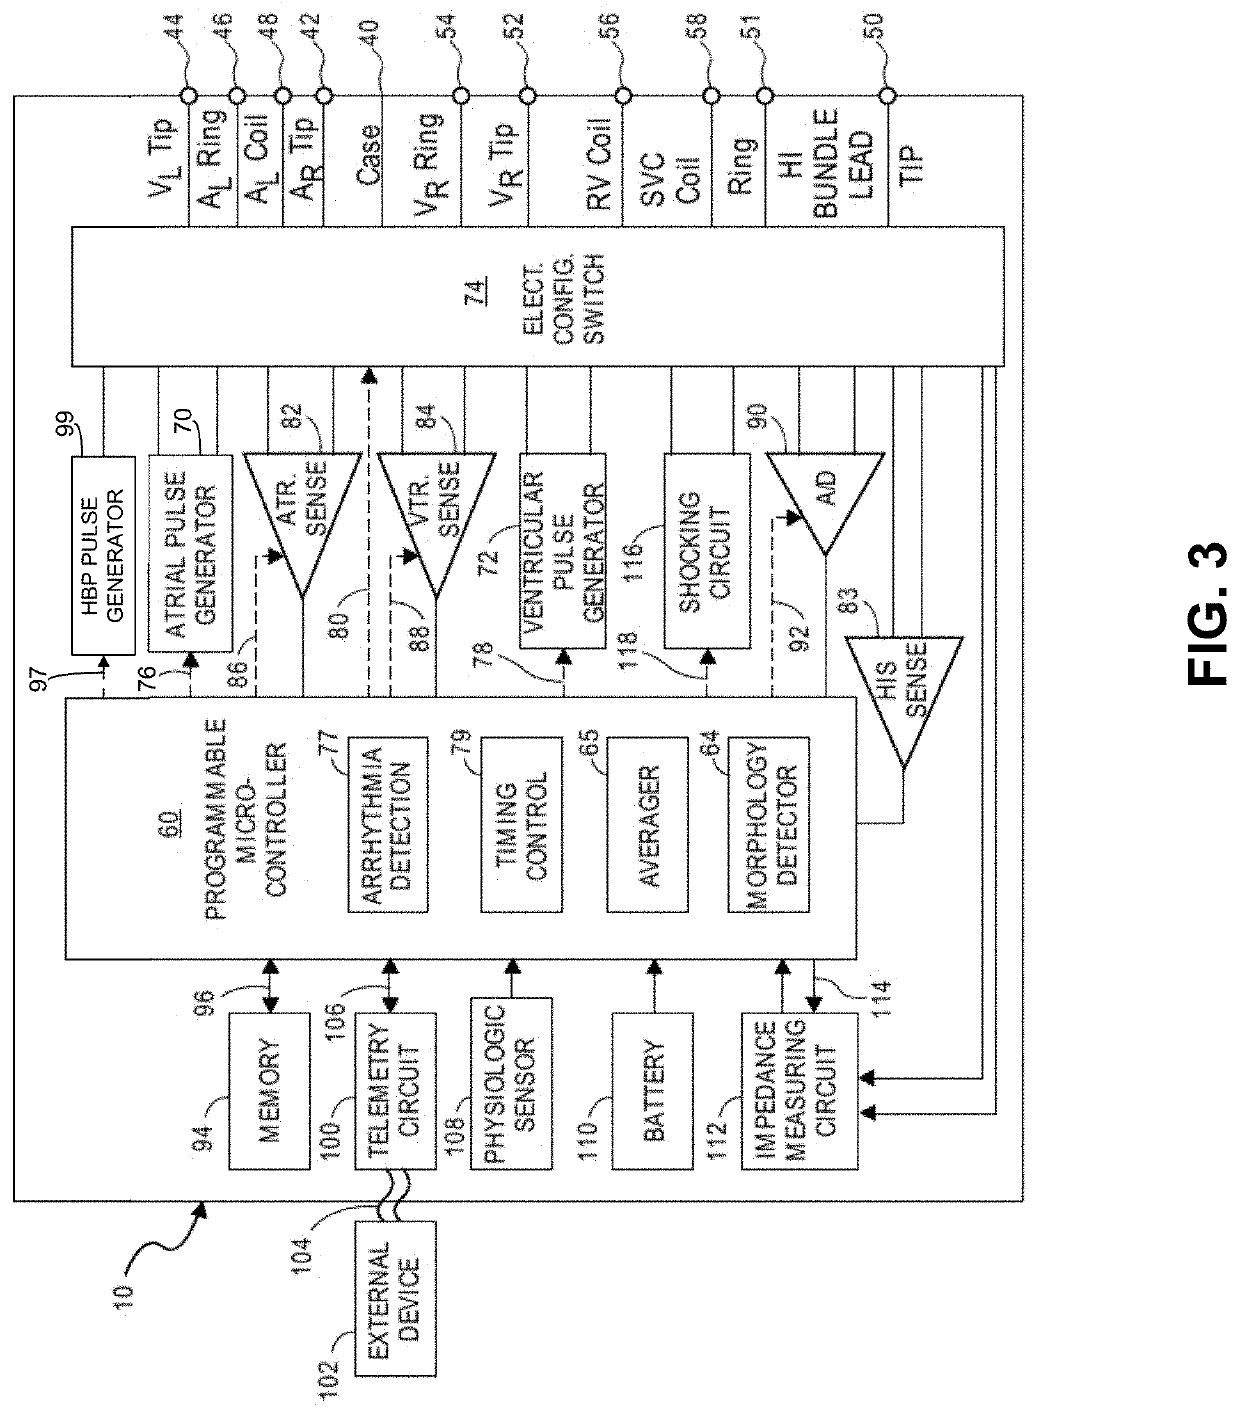 Time domain-based methods for his bundle capture classification